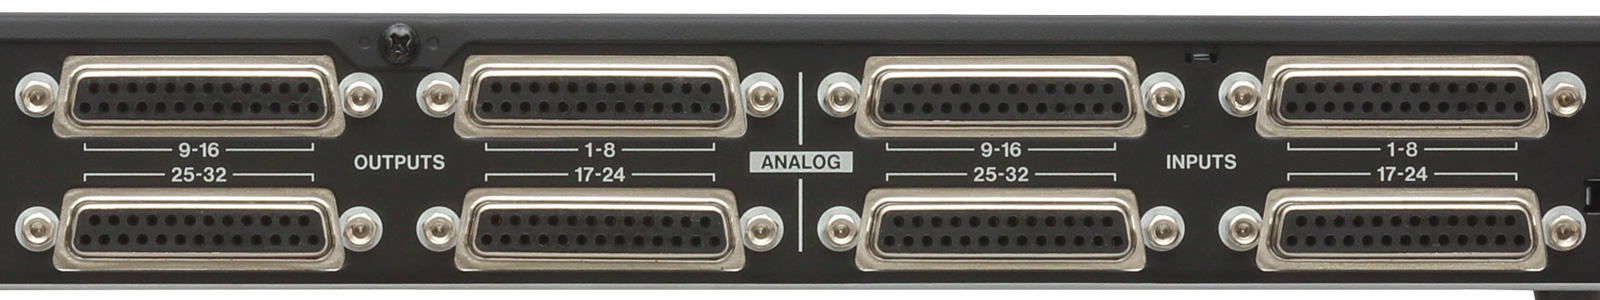 Breakout boxes that enable flexible choice of connectors according to purposes